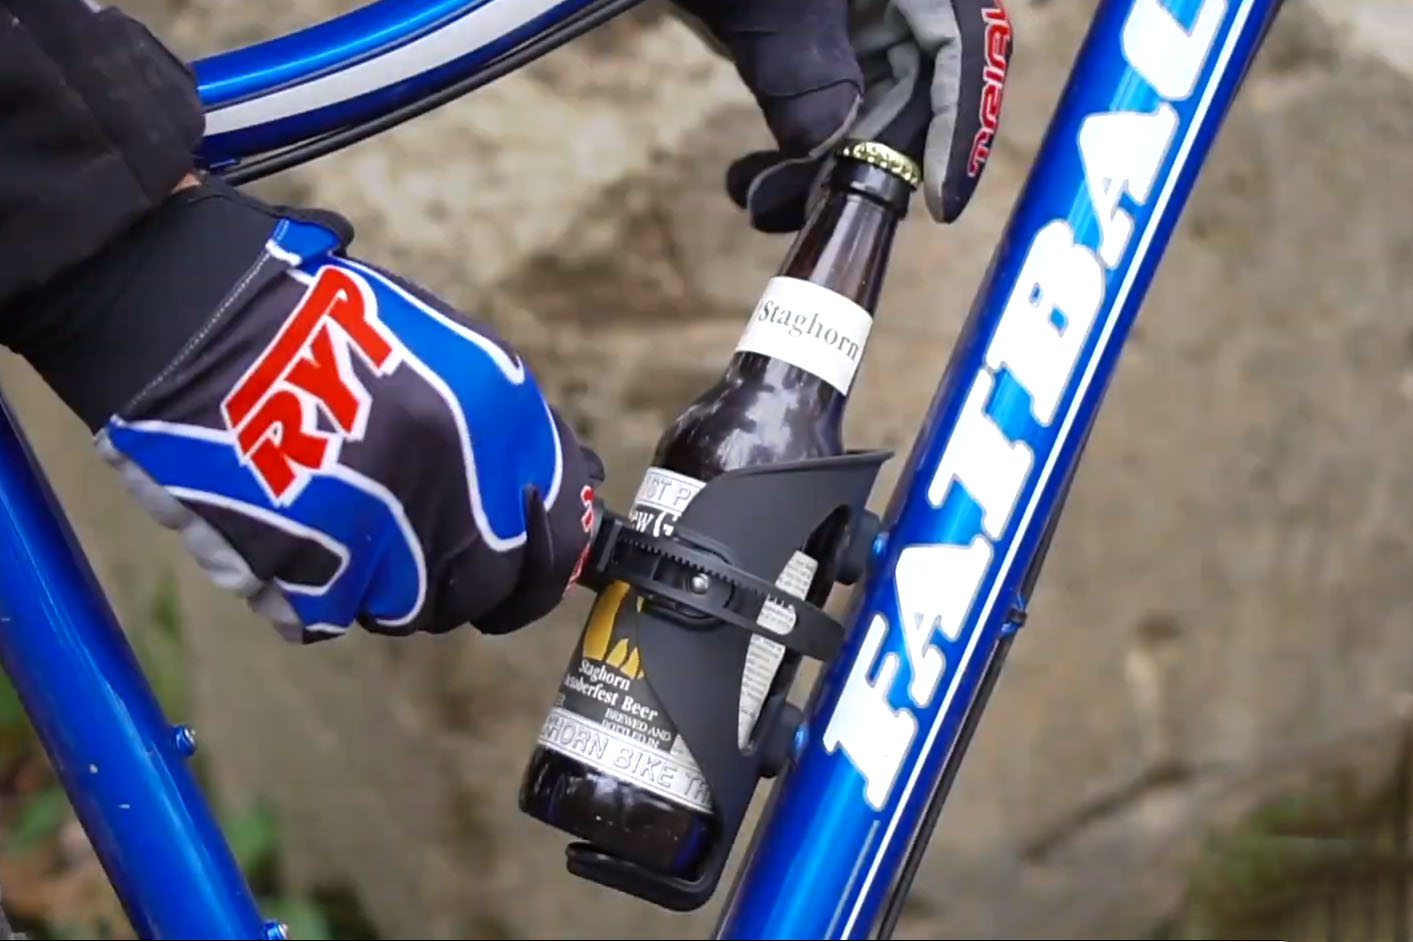 Bikase ABC Cage lets you bring any beverage of (almost) any size w/ secure ratcheting fit